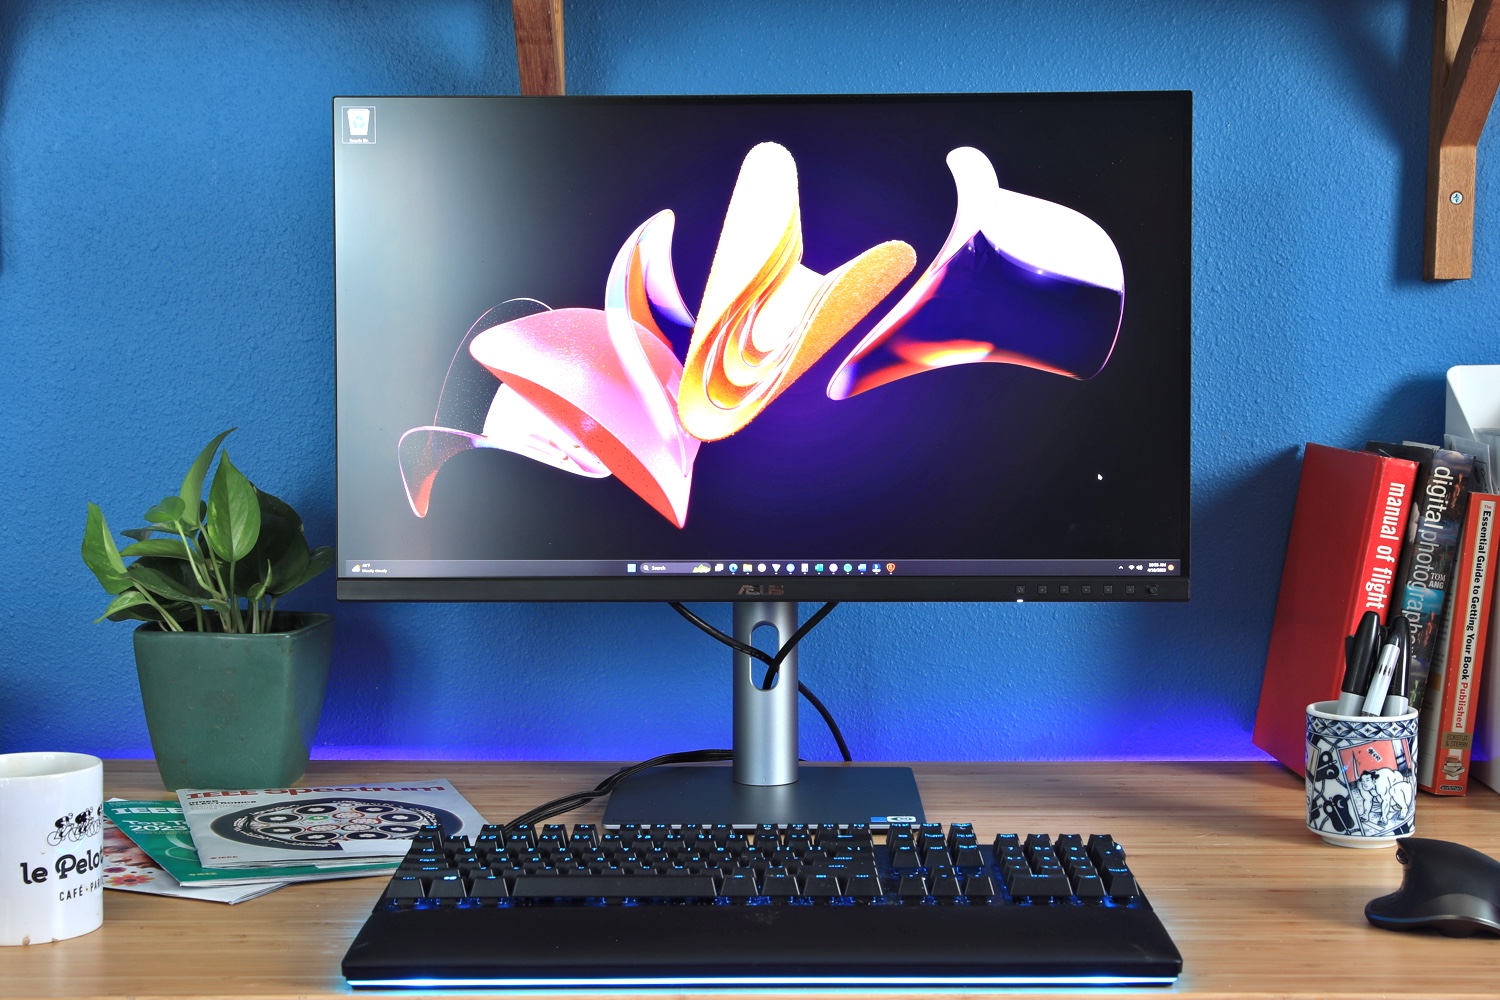 Asus ProArt PA279CRV - Best 4K monitor for graphic design